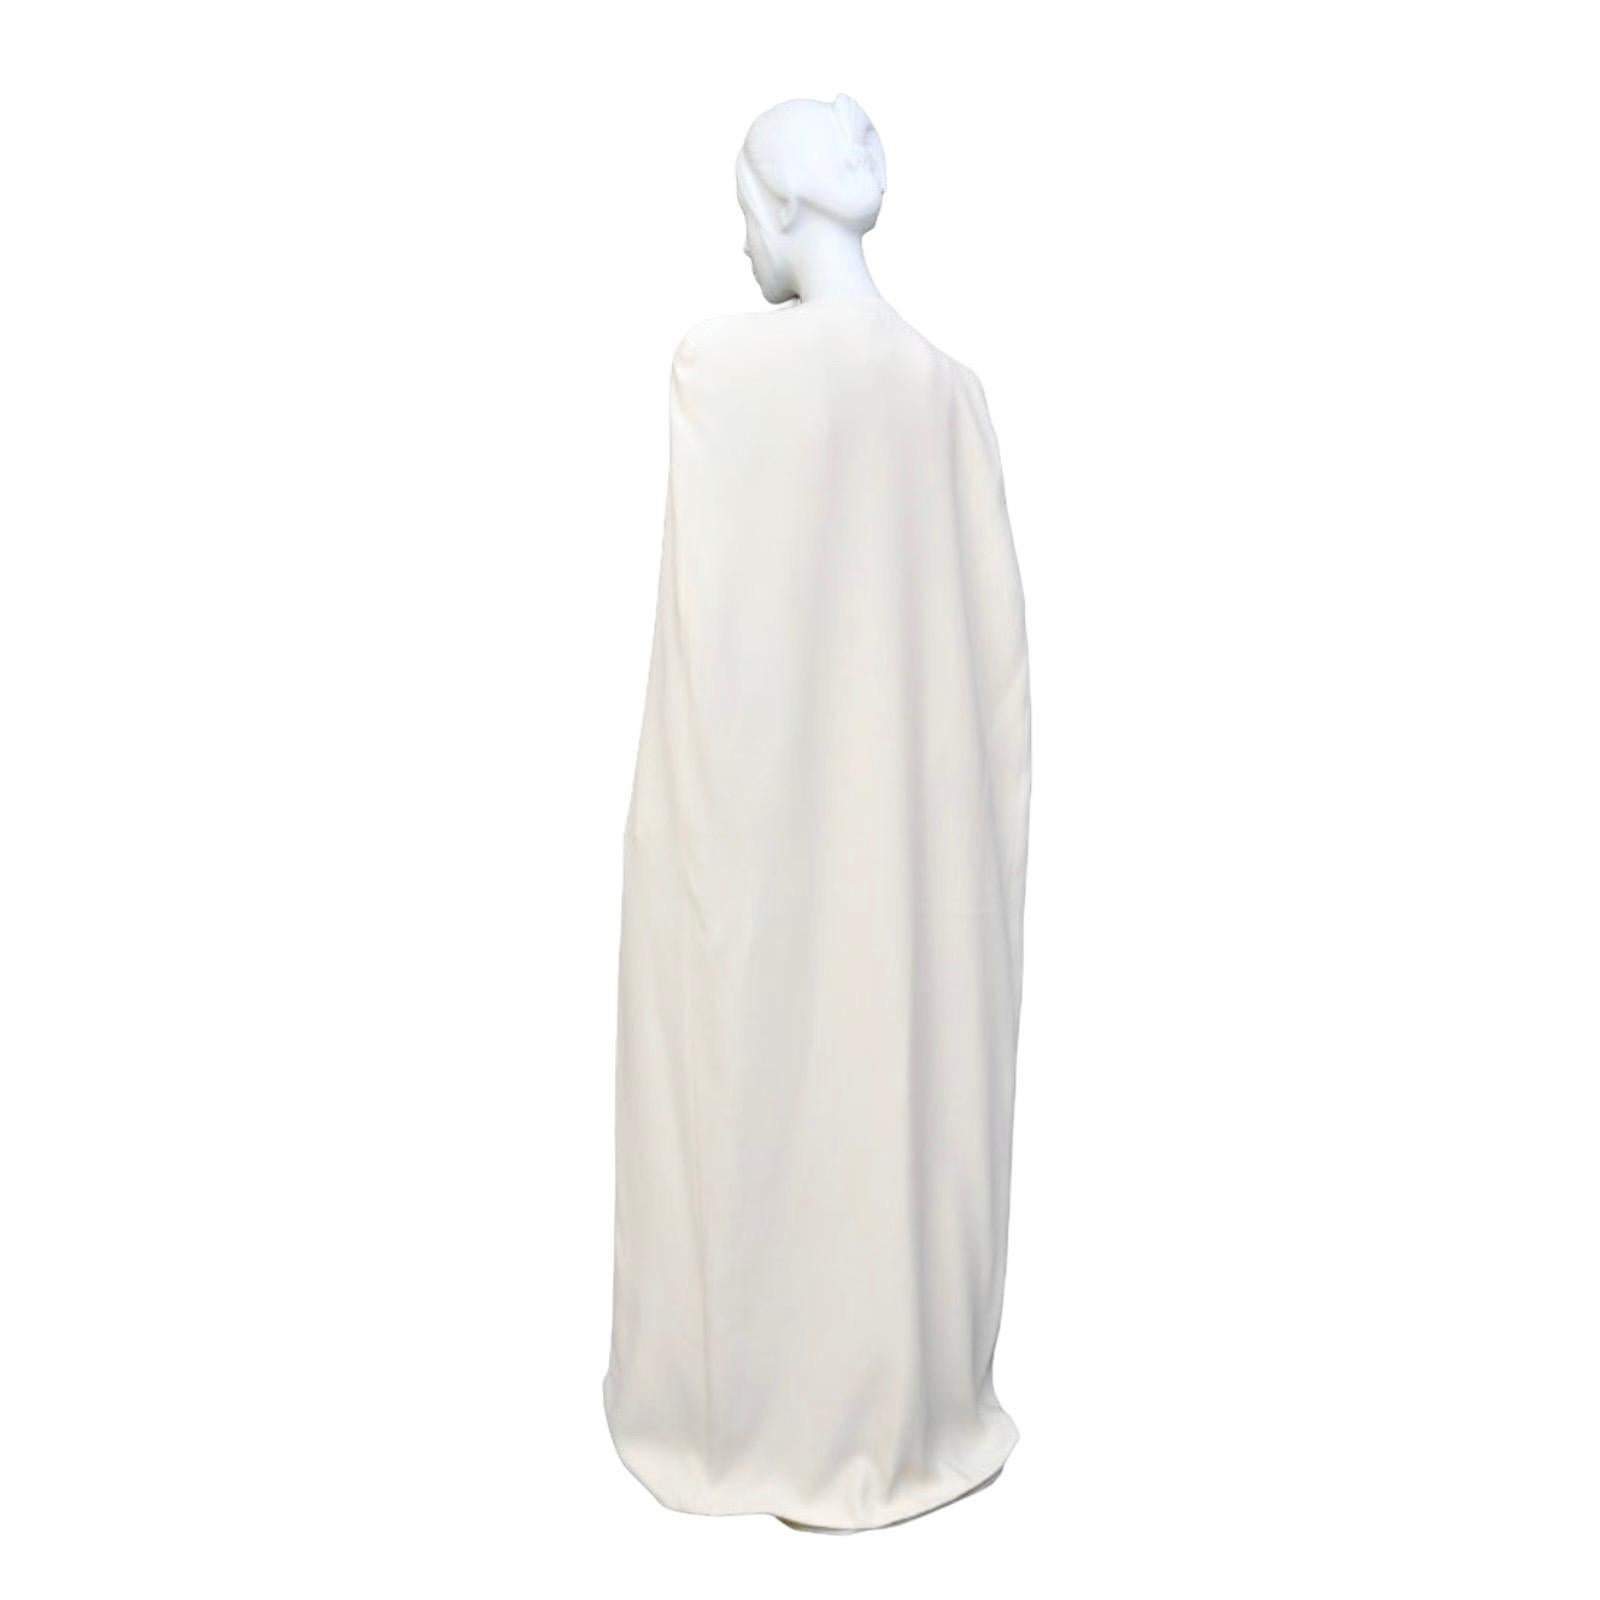 Gray ICONIC TOM FORD CHALK WHITE DOUBLE GEORGETTE STRETCH EVENING CAPE DRESS Sz. 38